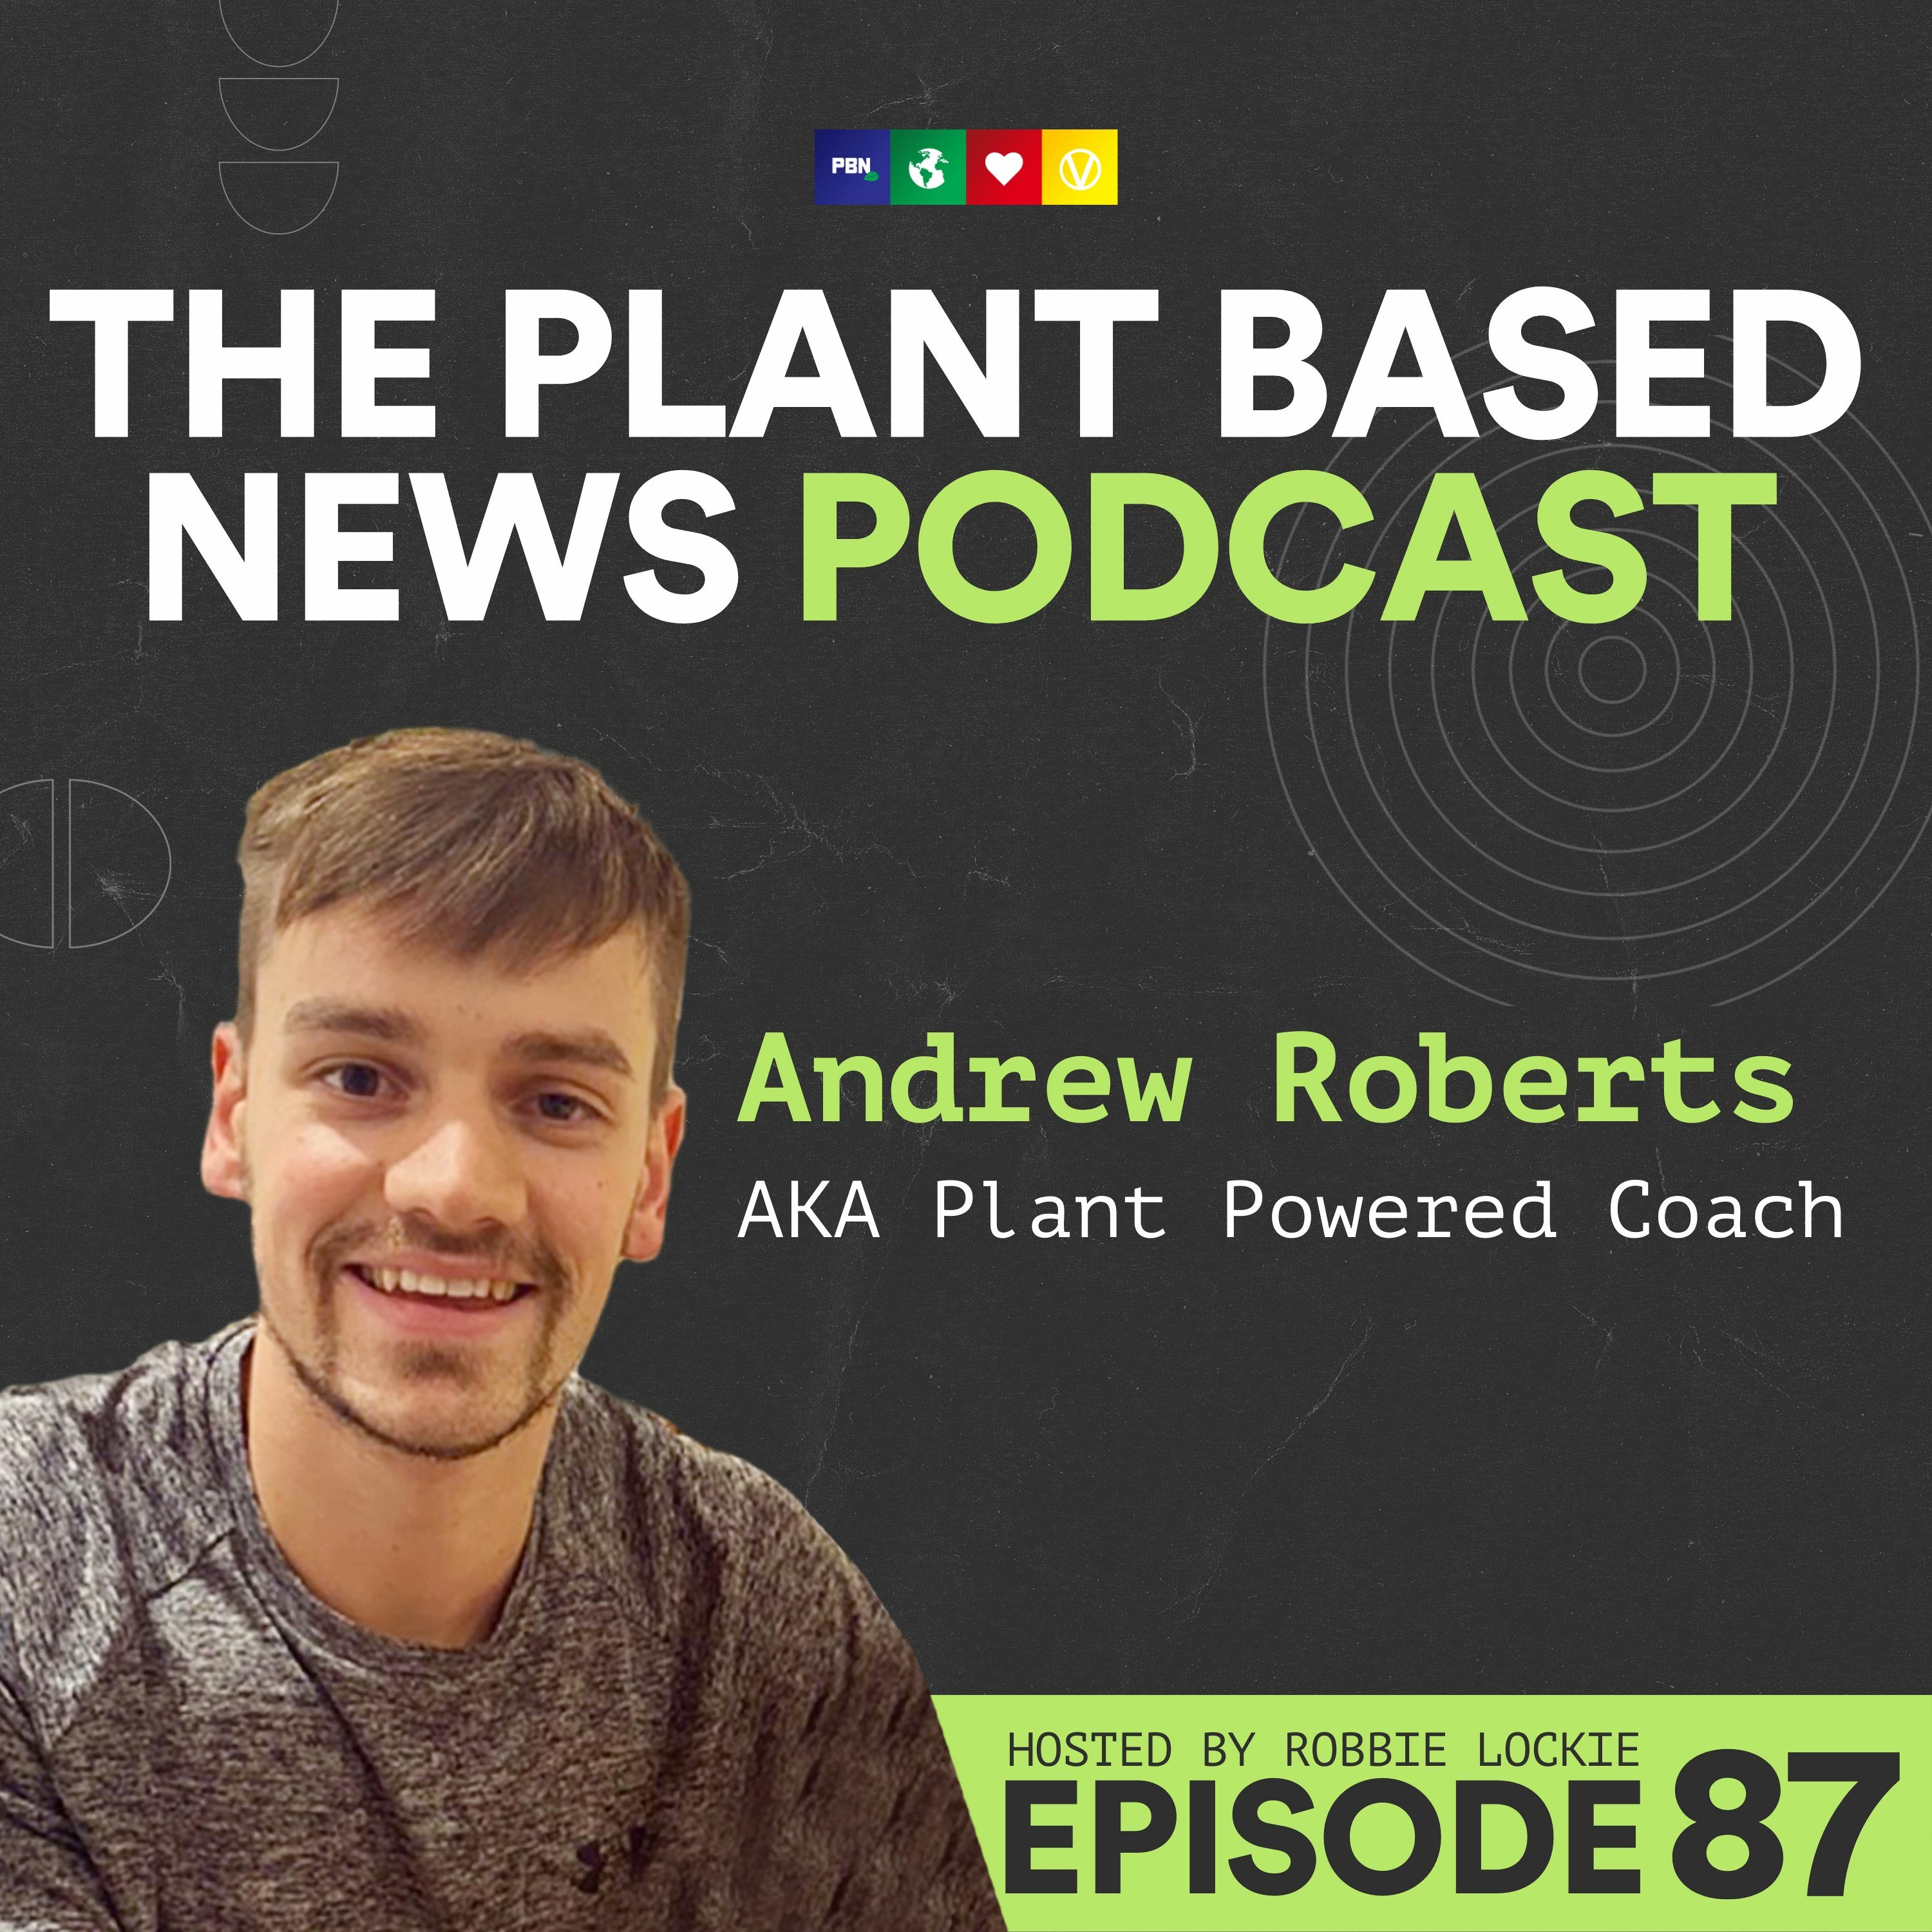 A Risky Experiment? This Personal Trainer Made Himself Obese. Here’s Why. Ep 87  Andrew Roberts